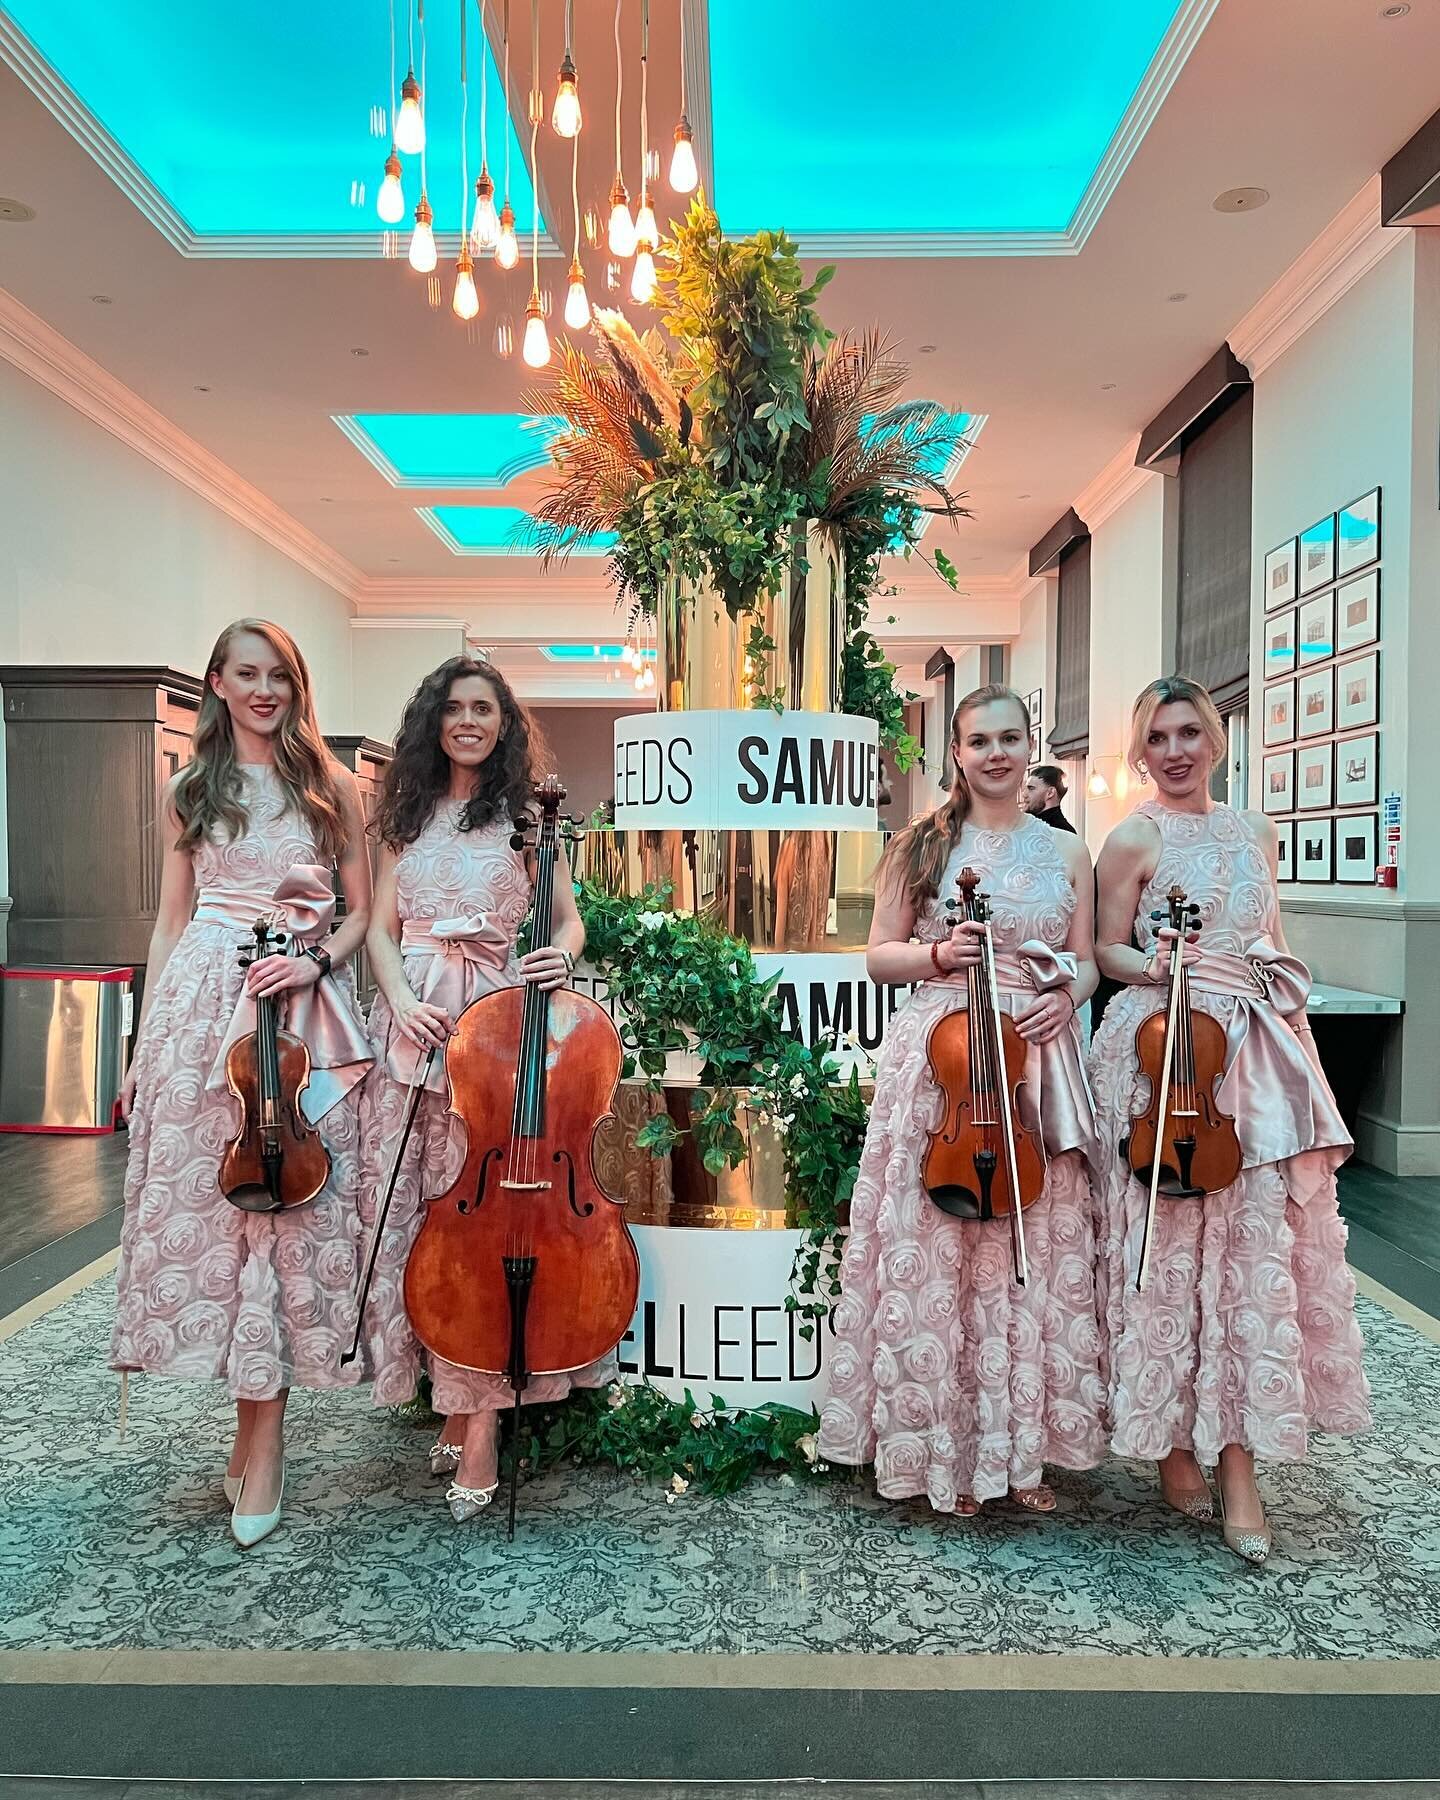 Happy Birthday @samuelleeds . Our string quartet performed our party pop playlist during dinner at De Vere Beaumont Estate . 
Thank you for having us!

📍 @deverebeaumontestate 

#stringquartet #corporateevents #birthdayparty #privateevents #luxuryev